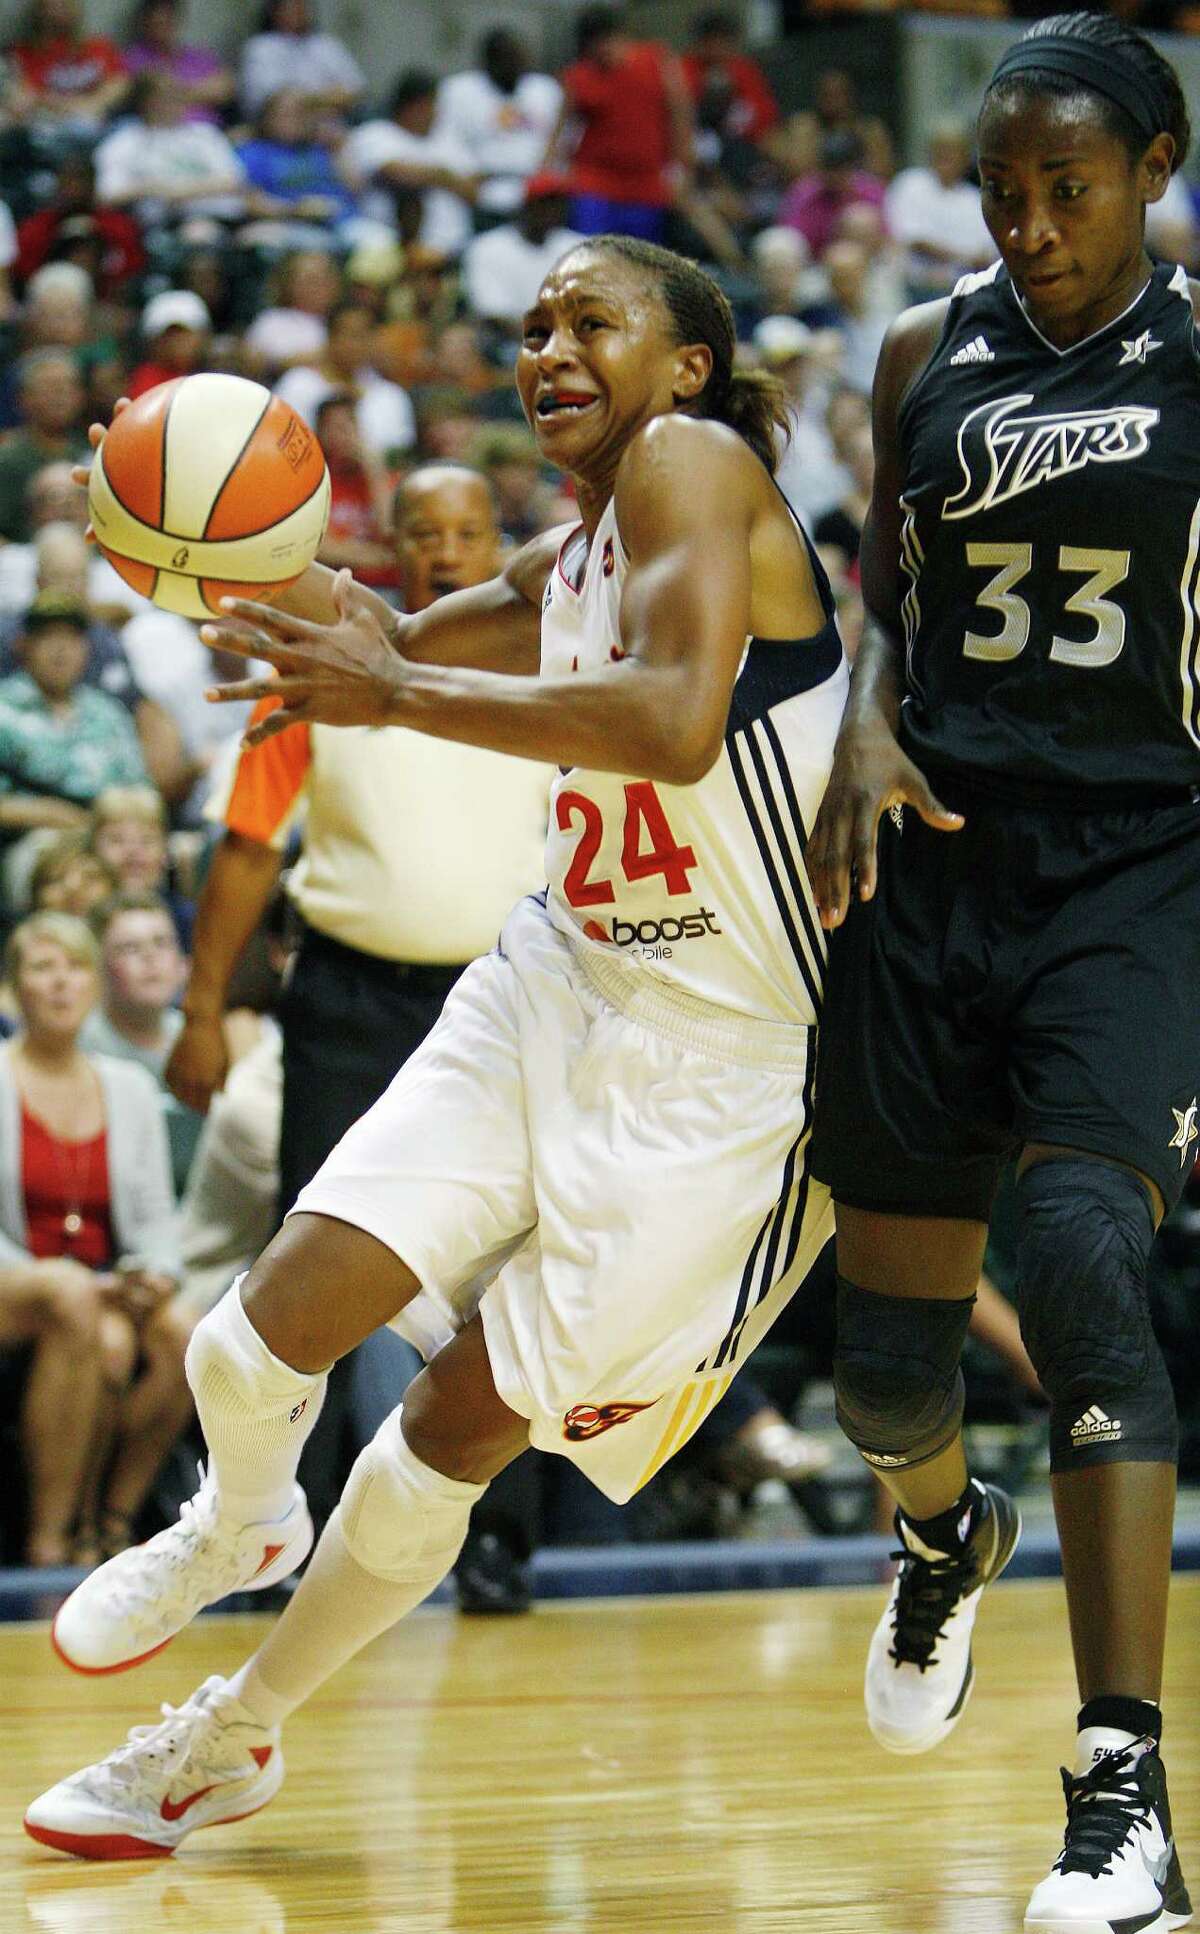 Indiana Fever's Tamika Catchings (24) drives against San Antonio Stars' Sophia Young (33) during the first half of a WNBA basketball game, Thursday, July 5, 2012, in Indianapolis.